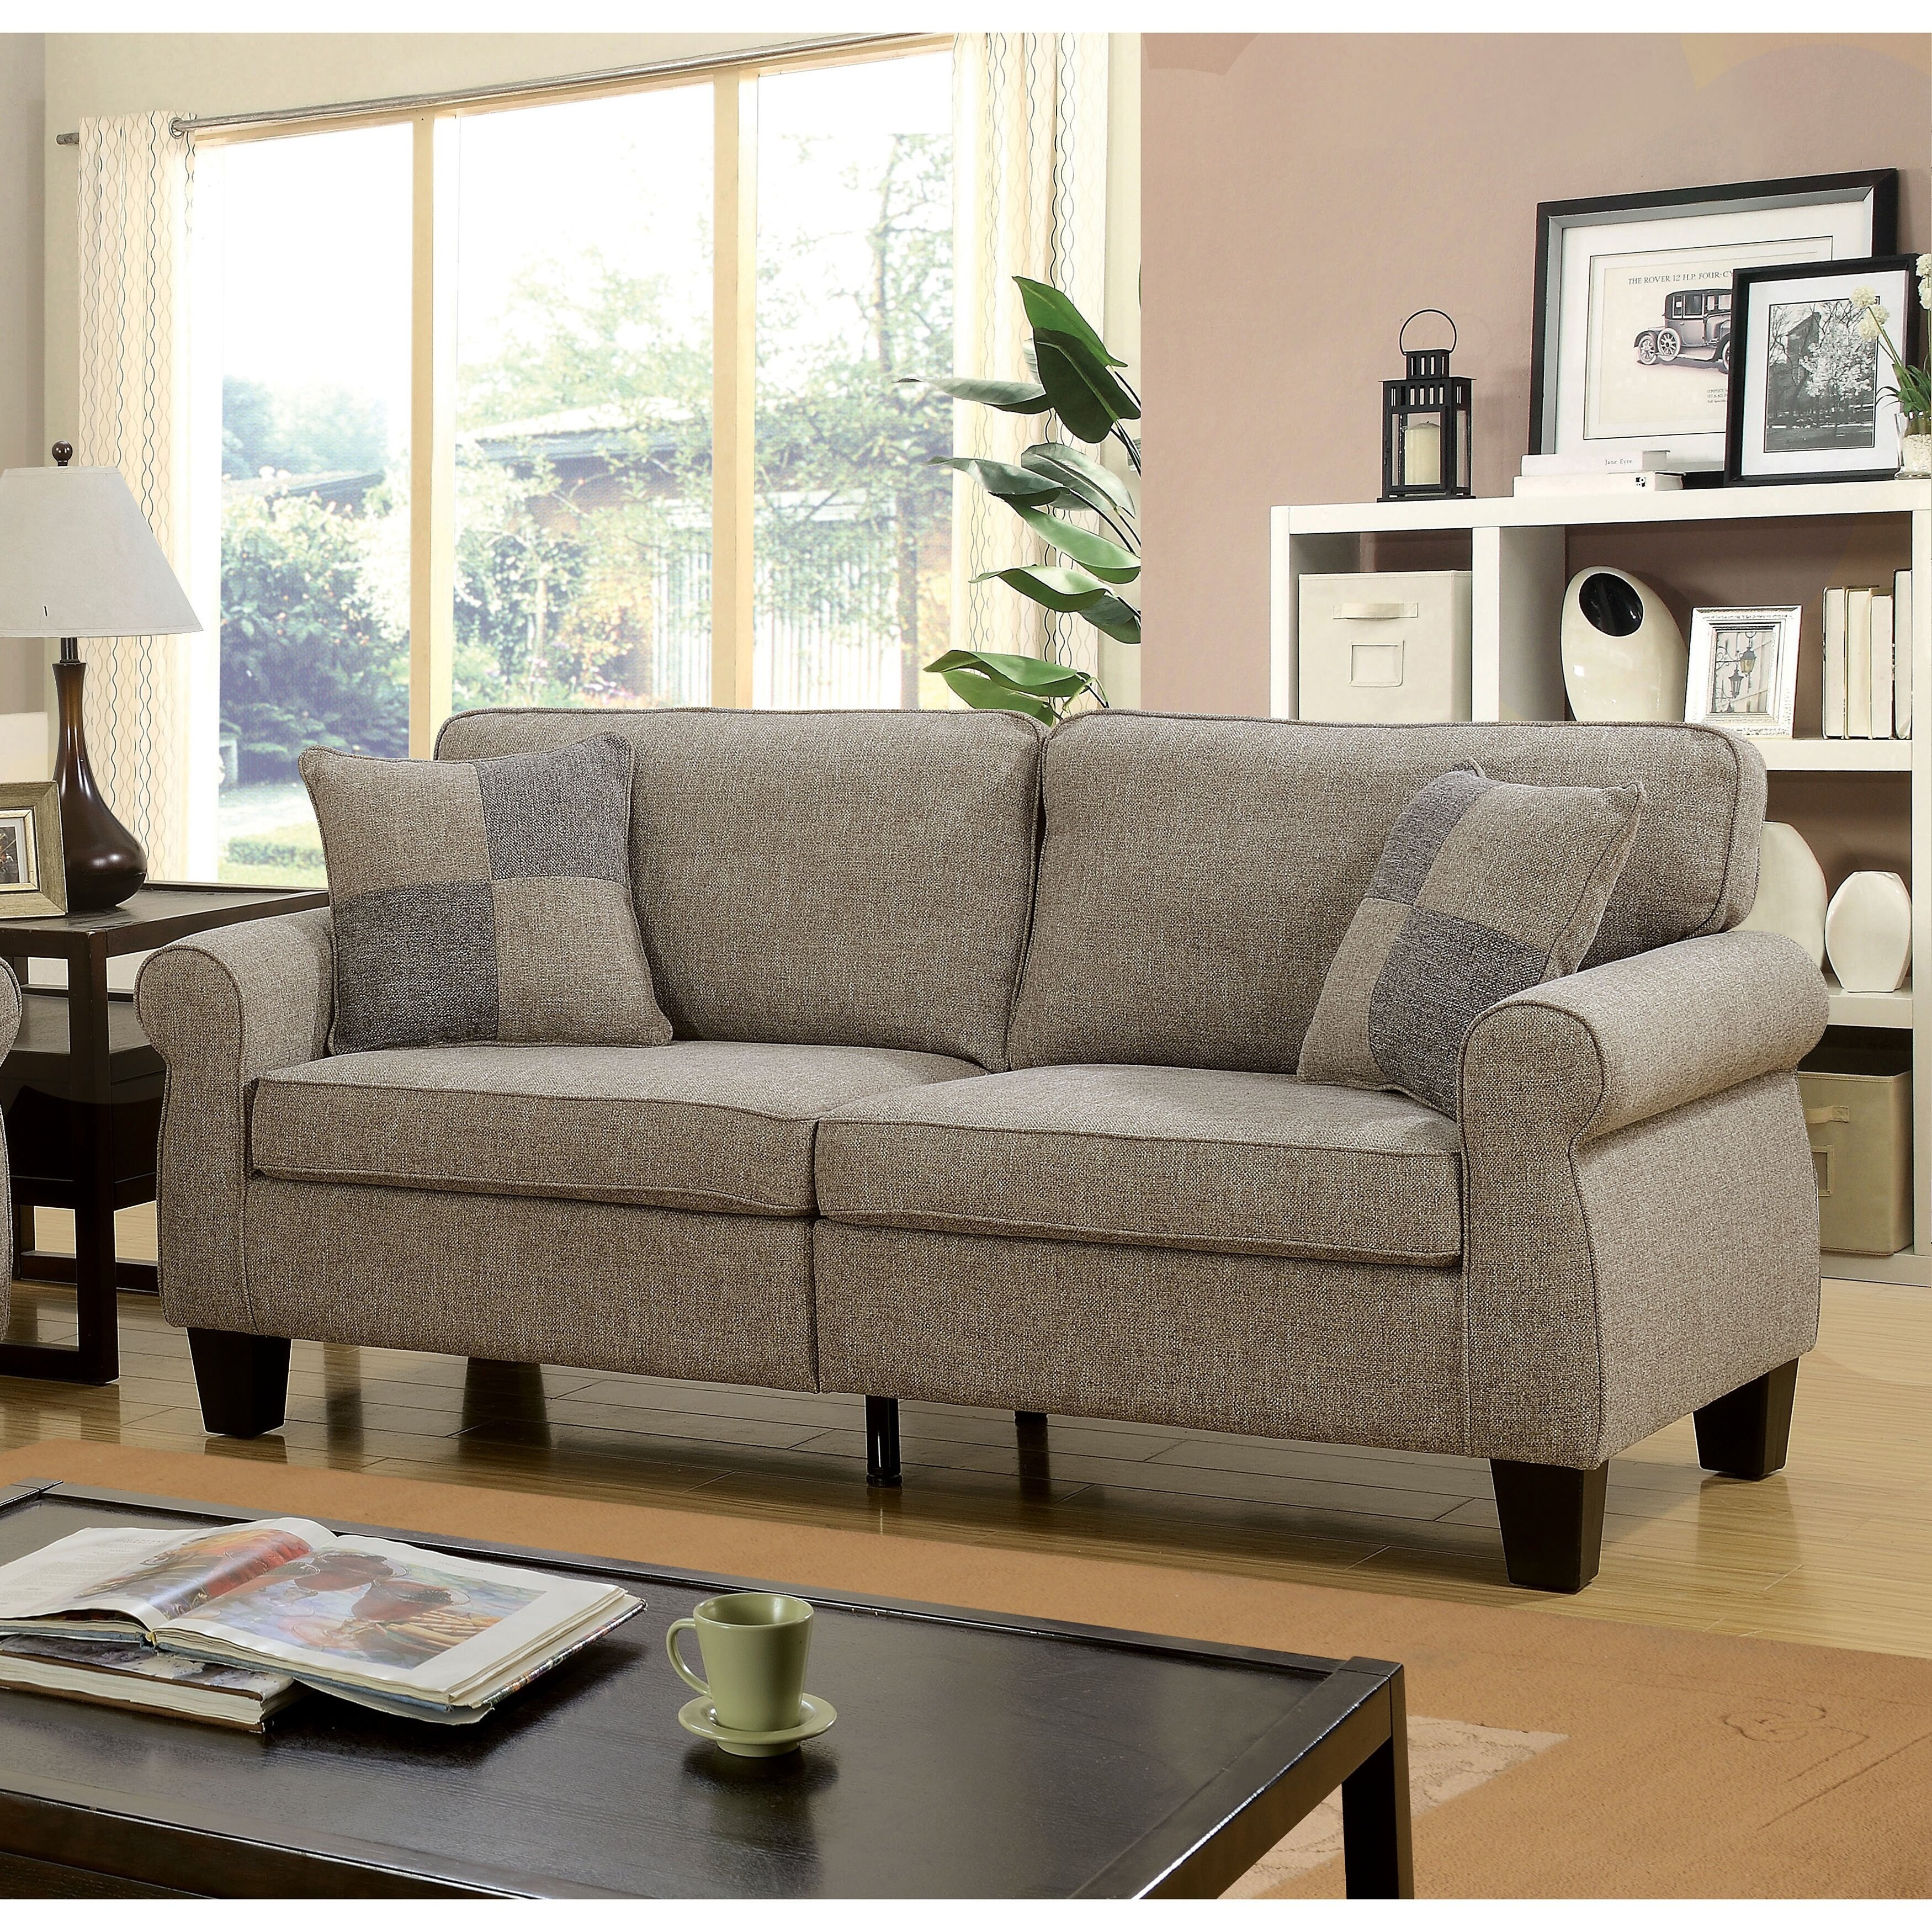 https://ak1.ostkcdn.com/images/products/is/images/direct/3aa11a3cd7fa1238df0a2a275cb50db6da8c560a/Furniture-of-America-Herena-Transitional-Linen-like-Sofa.jpg